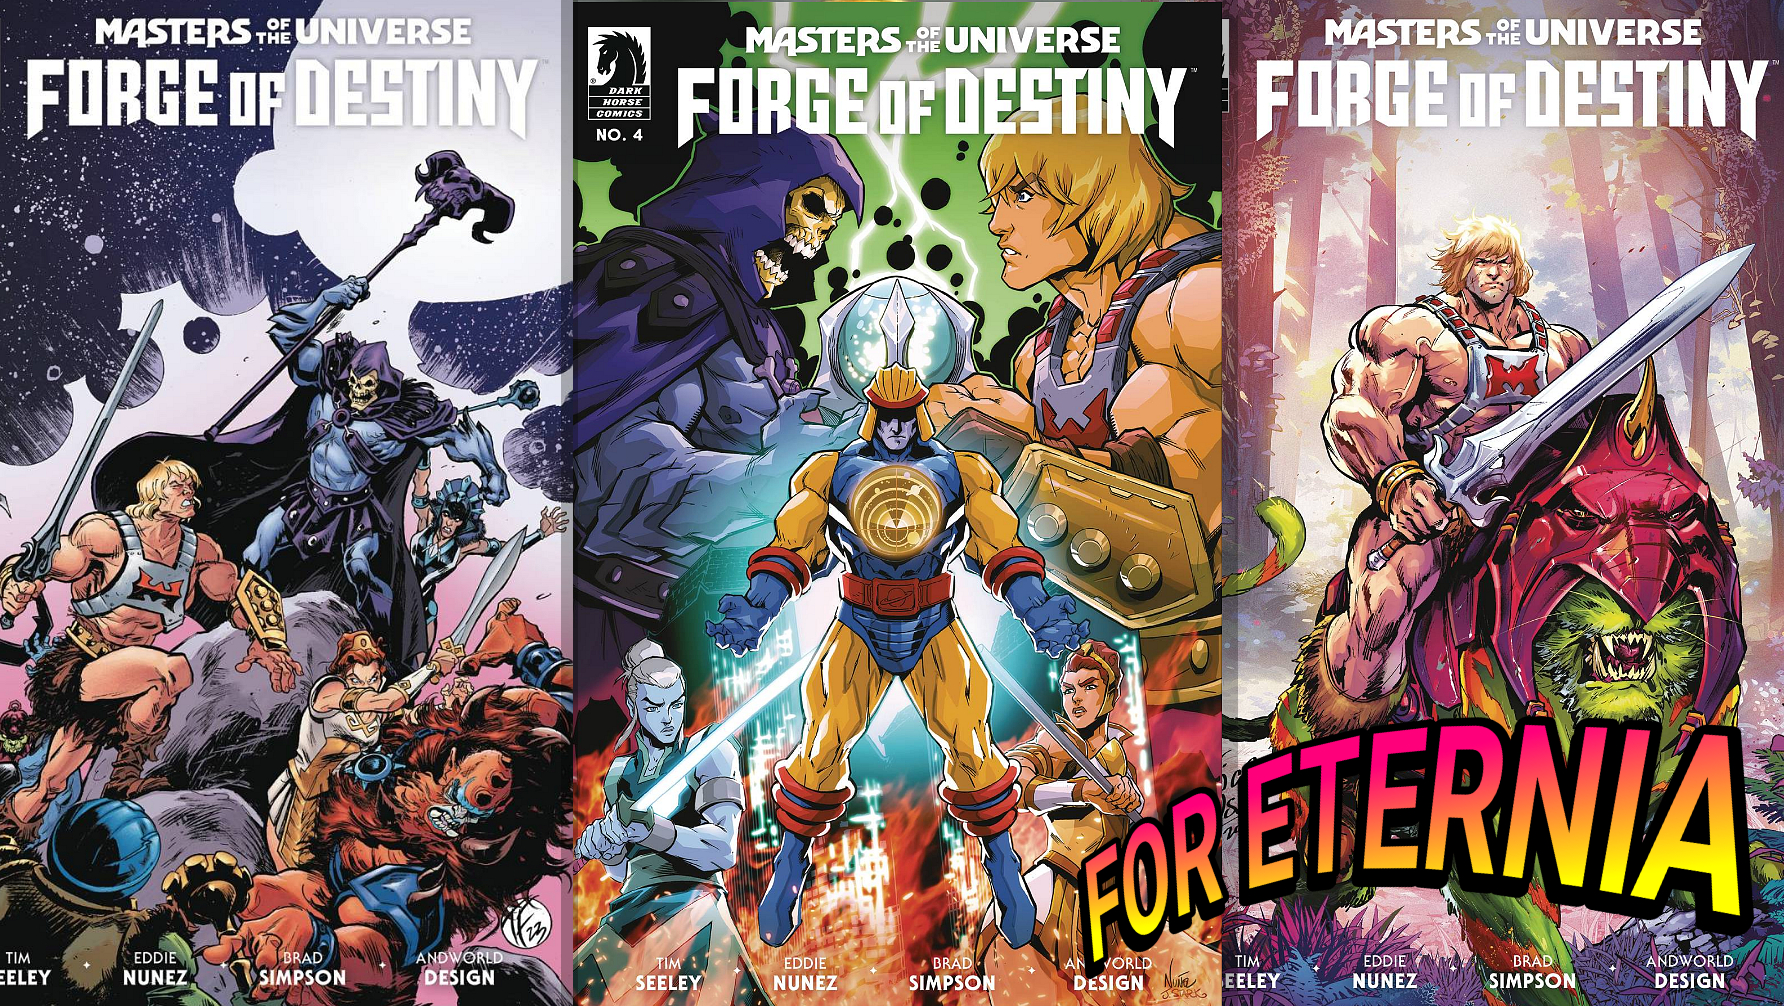 Dark Horse Comics FORGE OF DESTINY Issue #4 is out today!